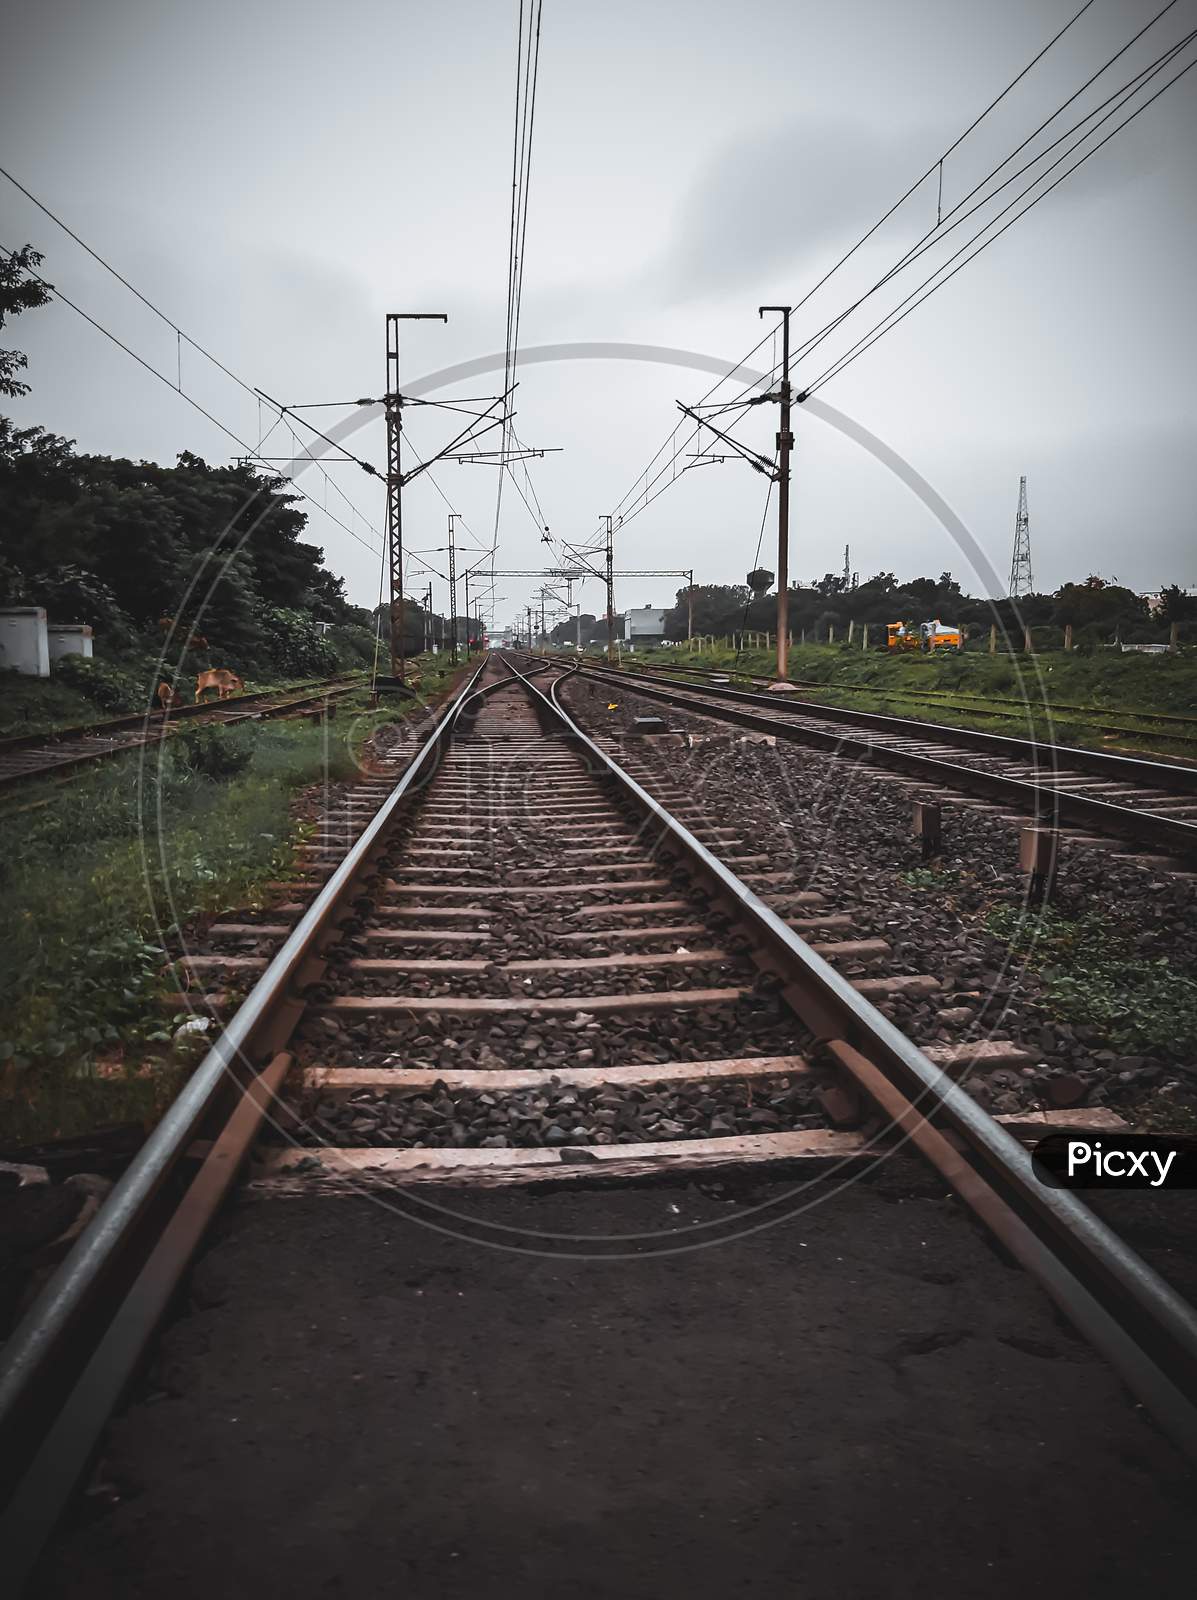 A landscape photo of railway line and some electric wires.